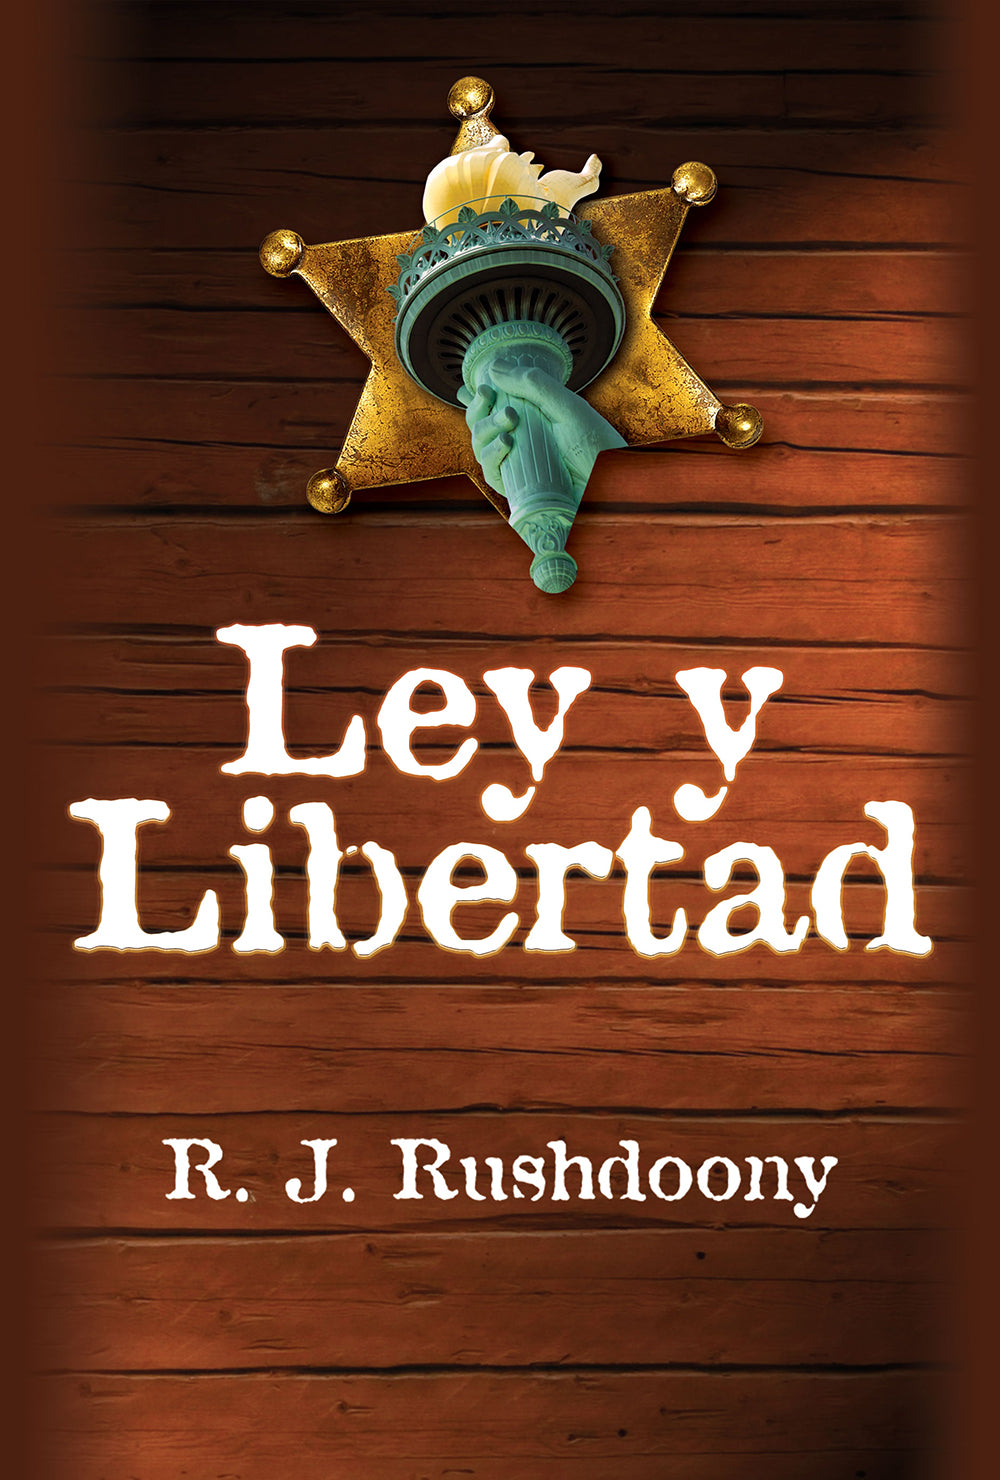 Law and Liberty (Ley y Libertad)